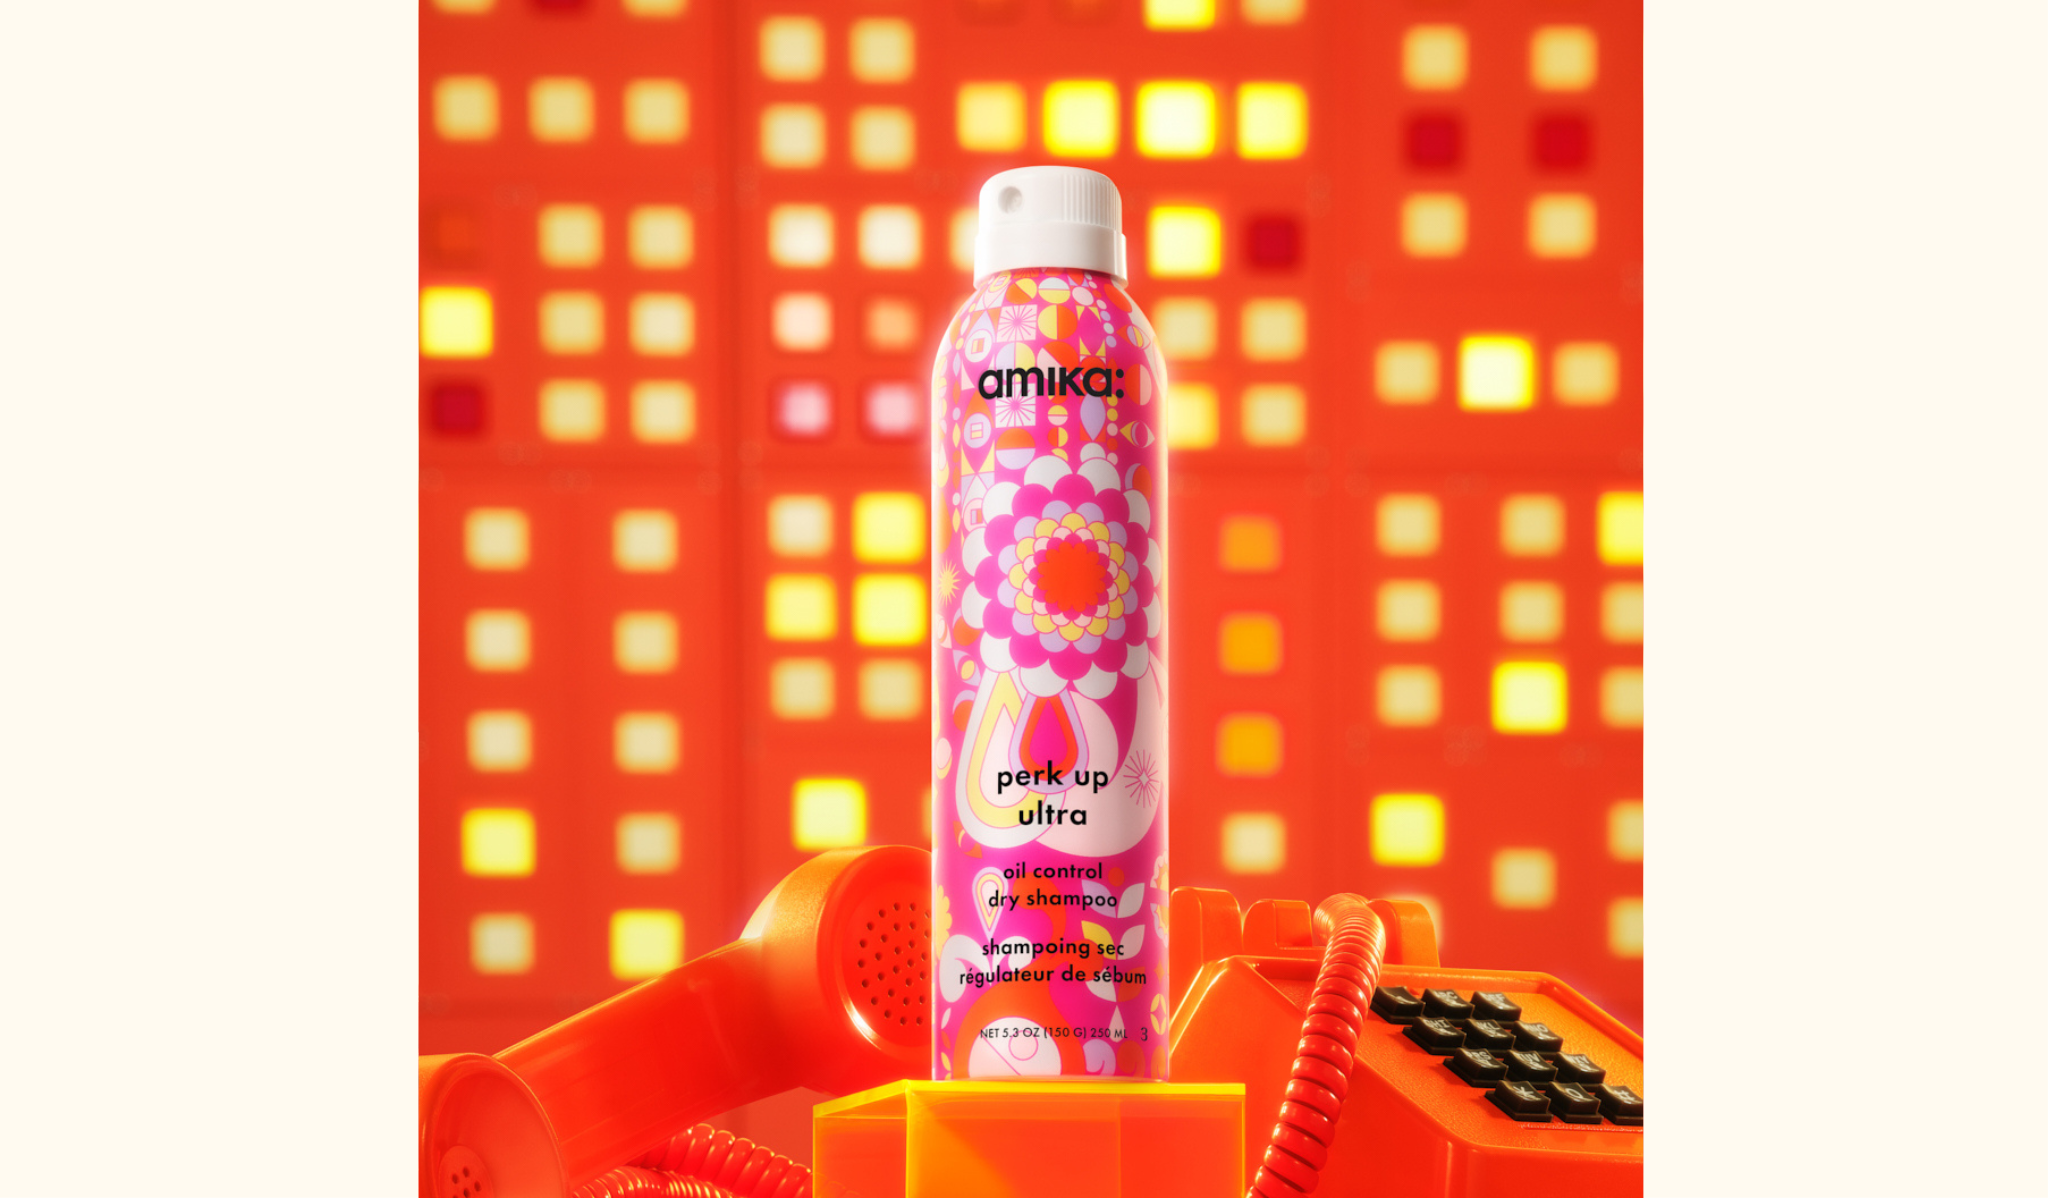 amika perk up ultra oil control dry shampoo spray bottle 5.3oz - pictured with an orange telephone against a geometric background